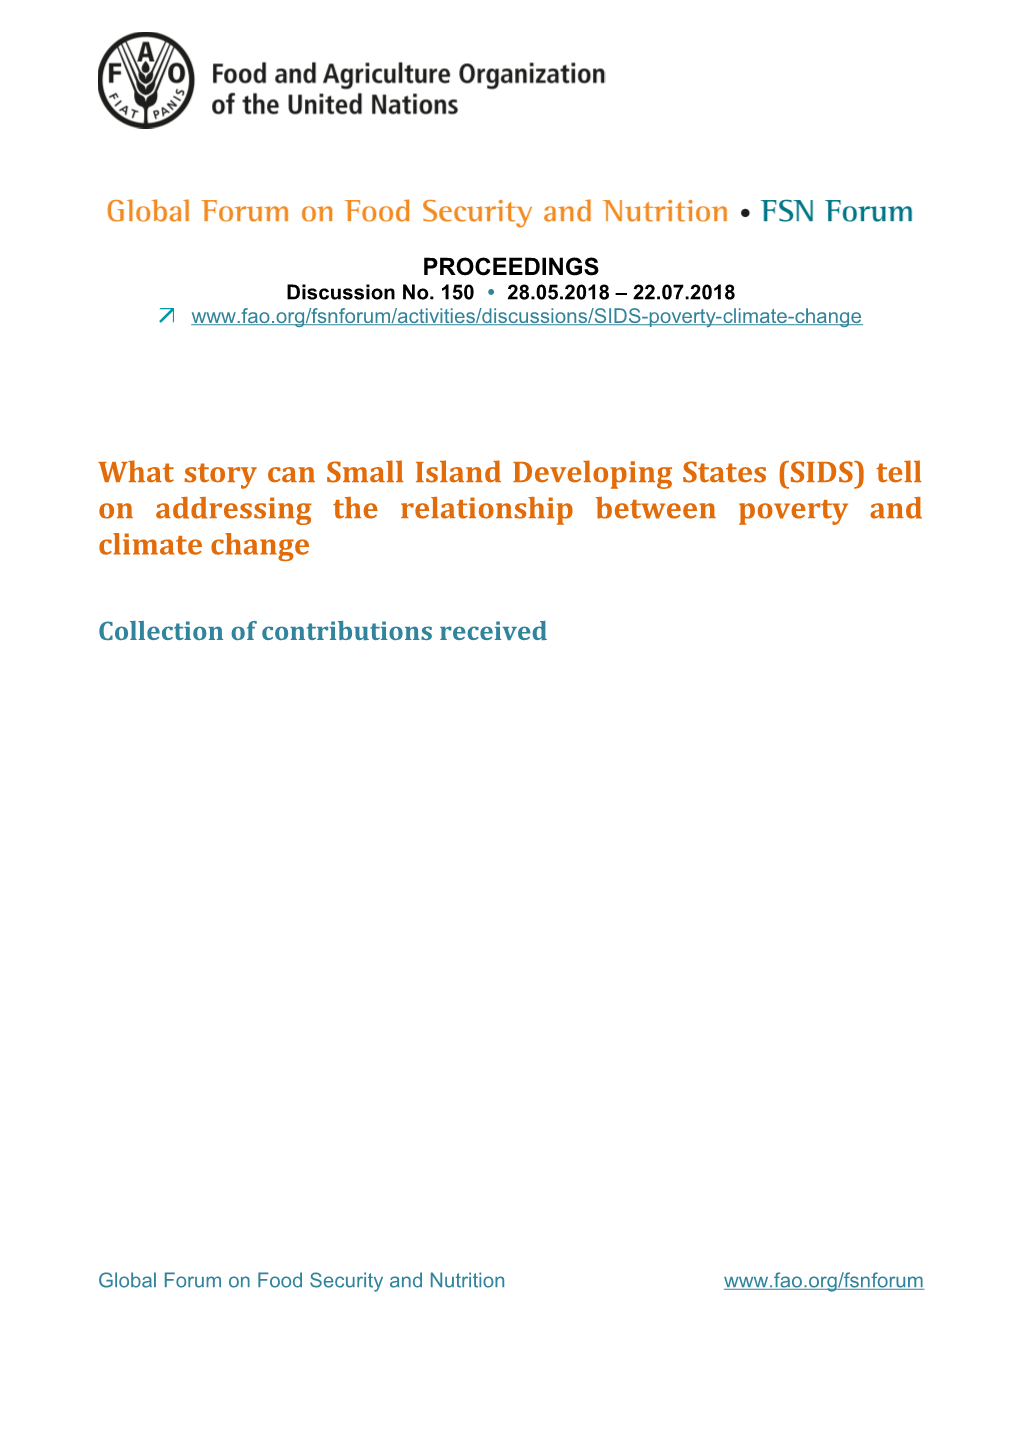 What Story Can Small Island Developing States (SIDS) Tell on Addressing the Relationship